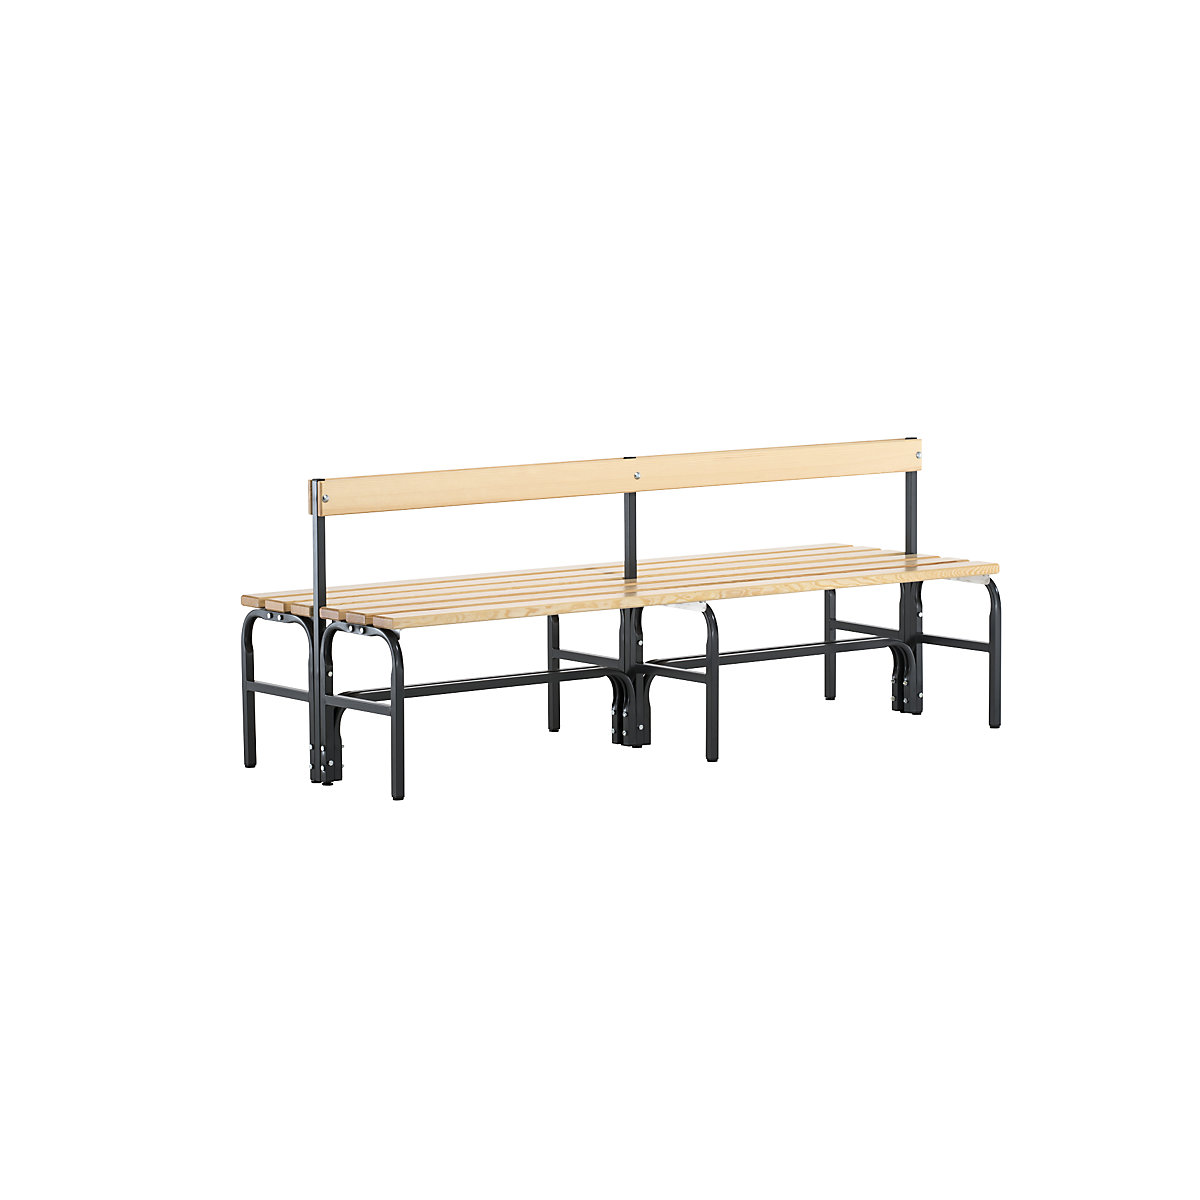 Half height cloakroom bench with back rest, double sided – Sypro, pine wood slats, length 1500 mm, charcoal-7